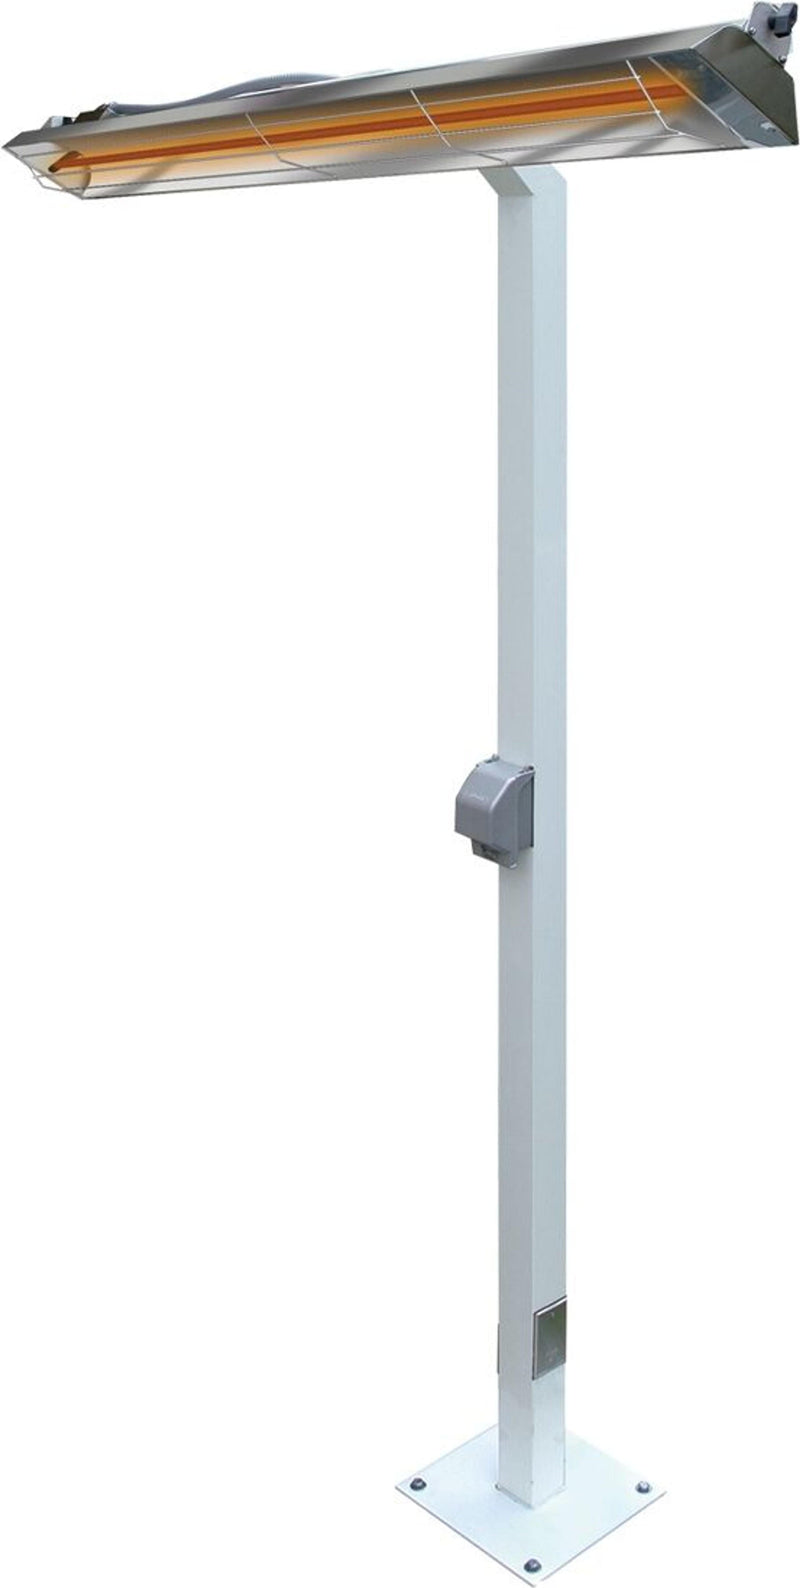 Infratech W39 Pole Mount - White Fits 39-inch Heaters 22-1250